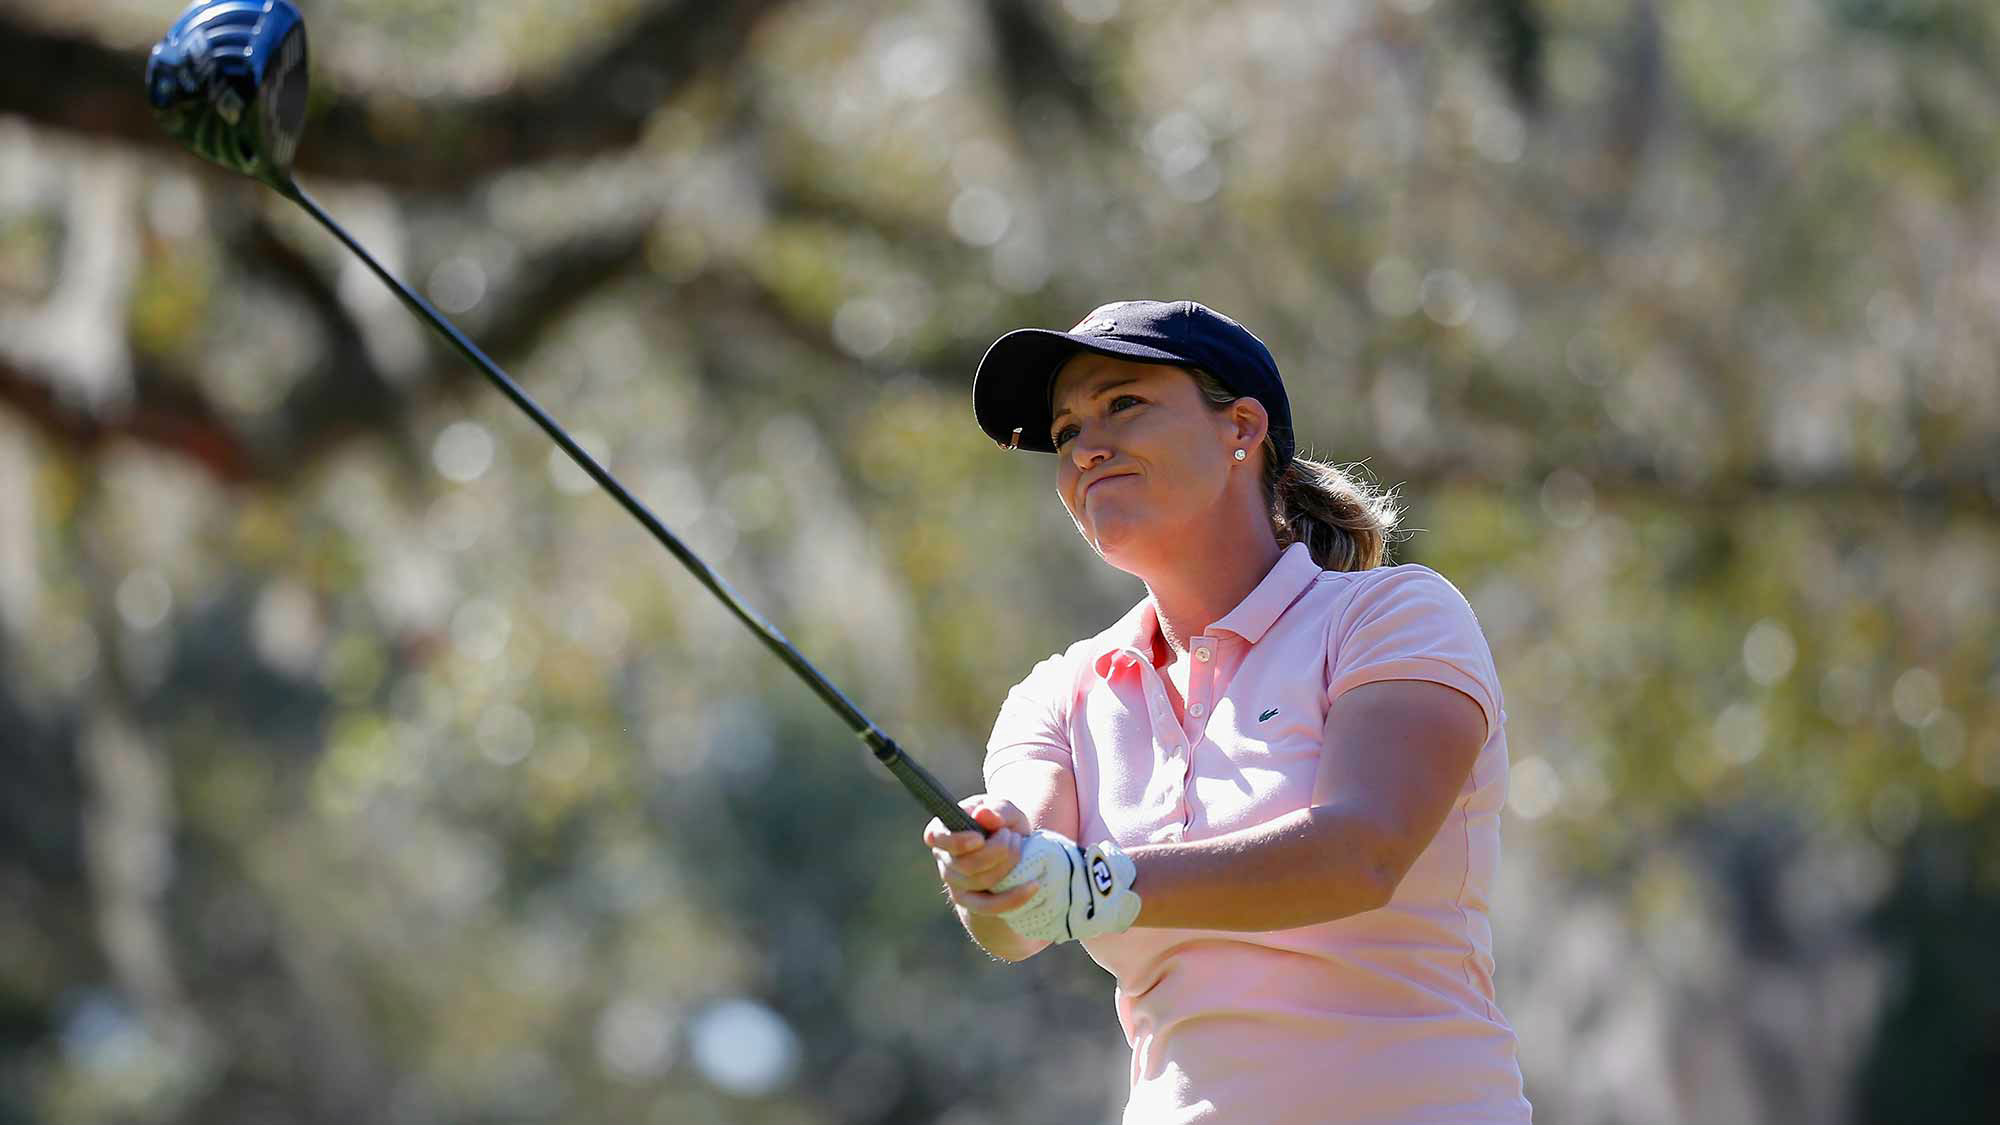 Cristie Kerr during Final Round at the Golden Ocala Golf & Equestrian Club on January 31, 2015 in Ocala, Florida